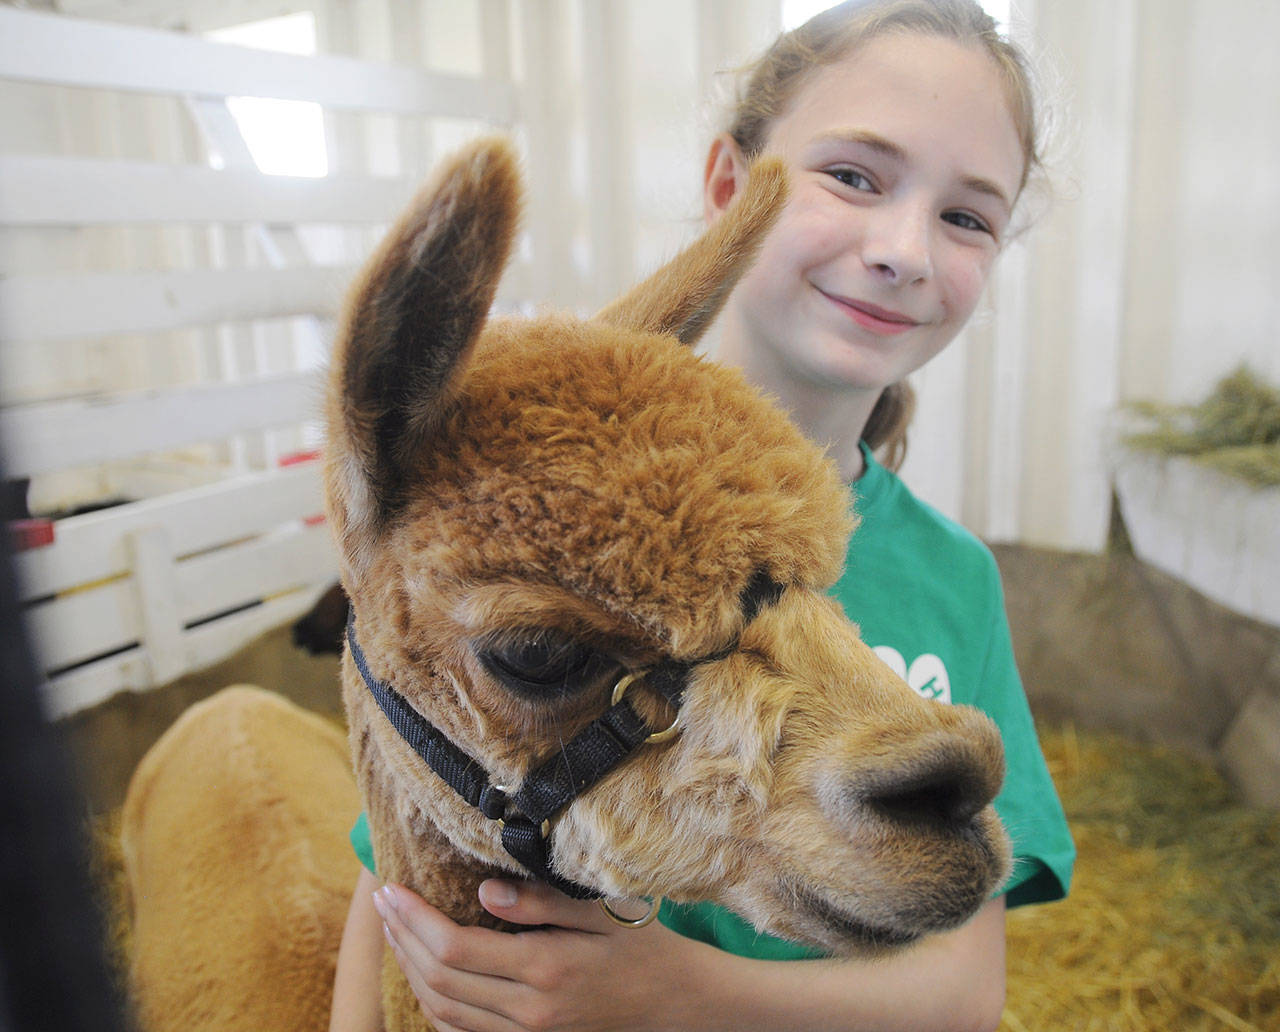 Faern Tait of Port Angeles shows off Valentina, a 10-year-old alpaca, at the 2019 Clallam County Fair. Officials have cancelled the 2020 fair with Clallam County not likely able to host large gatherings by mid-August. Sequim Gazette file photo by Michael Dashiell